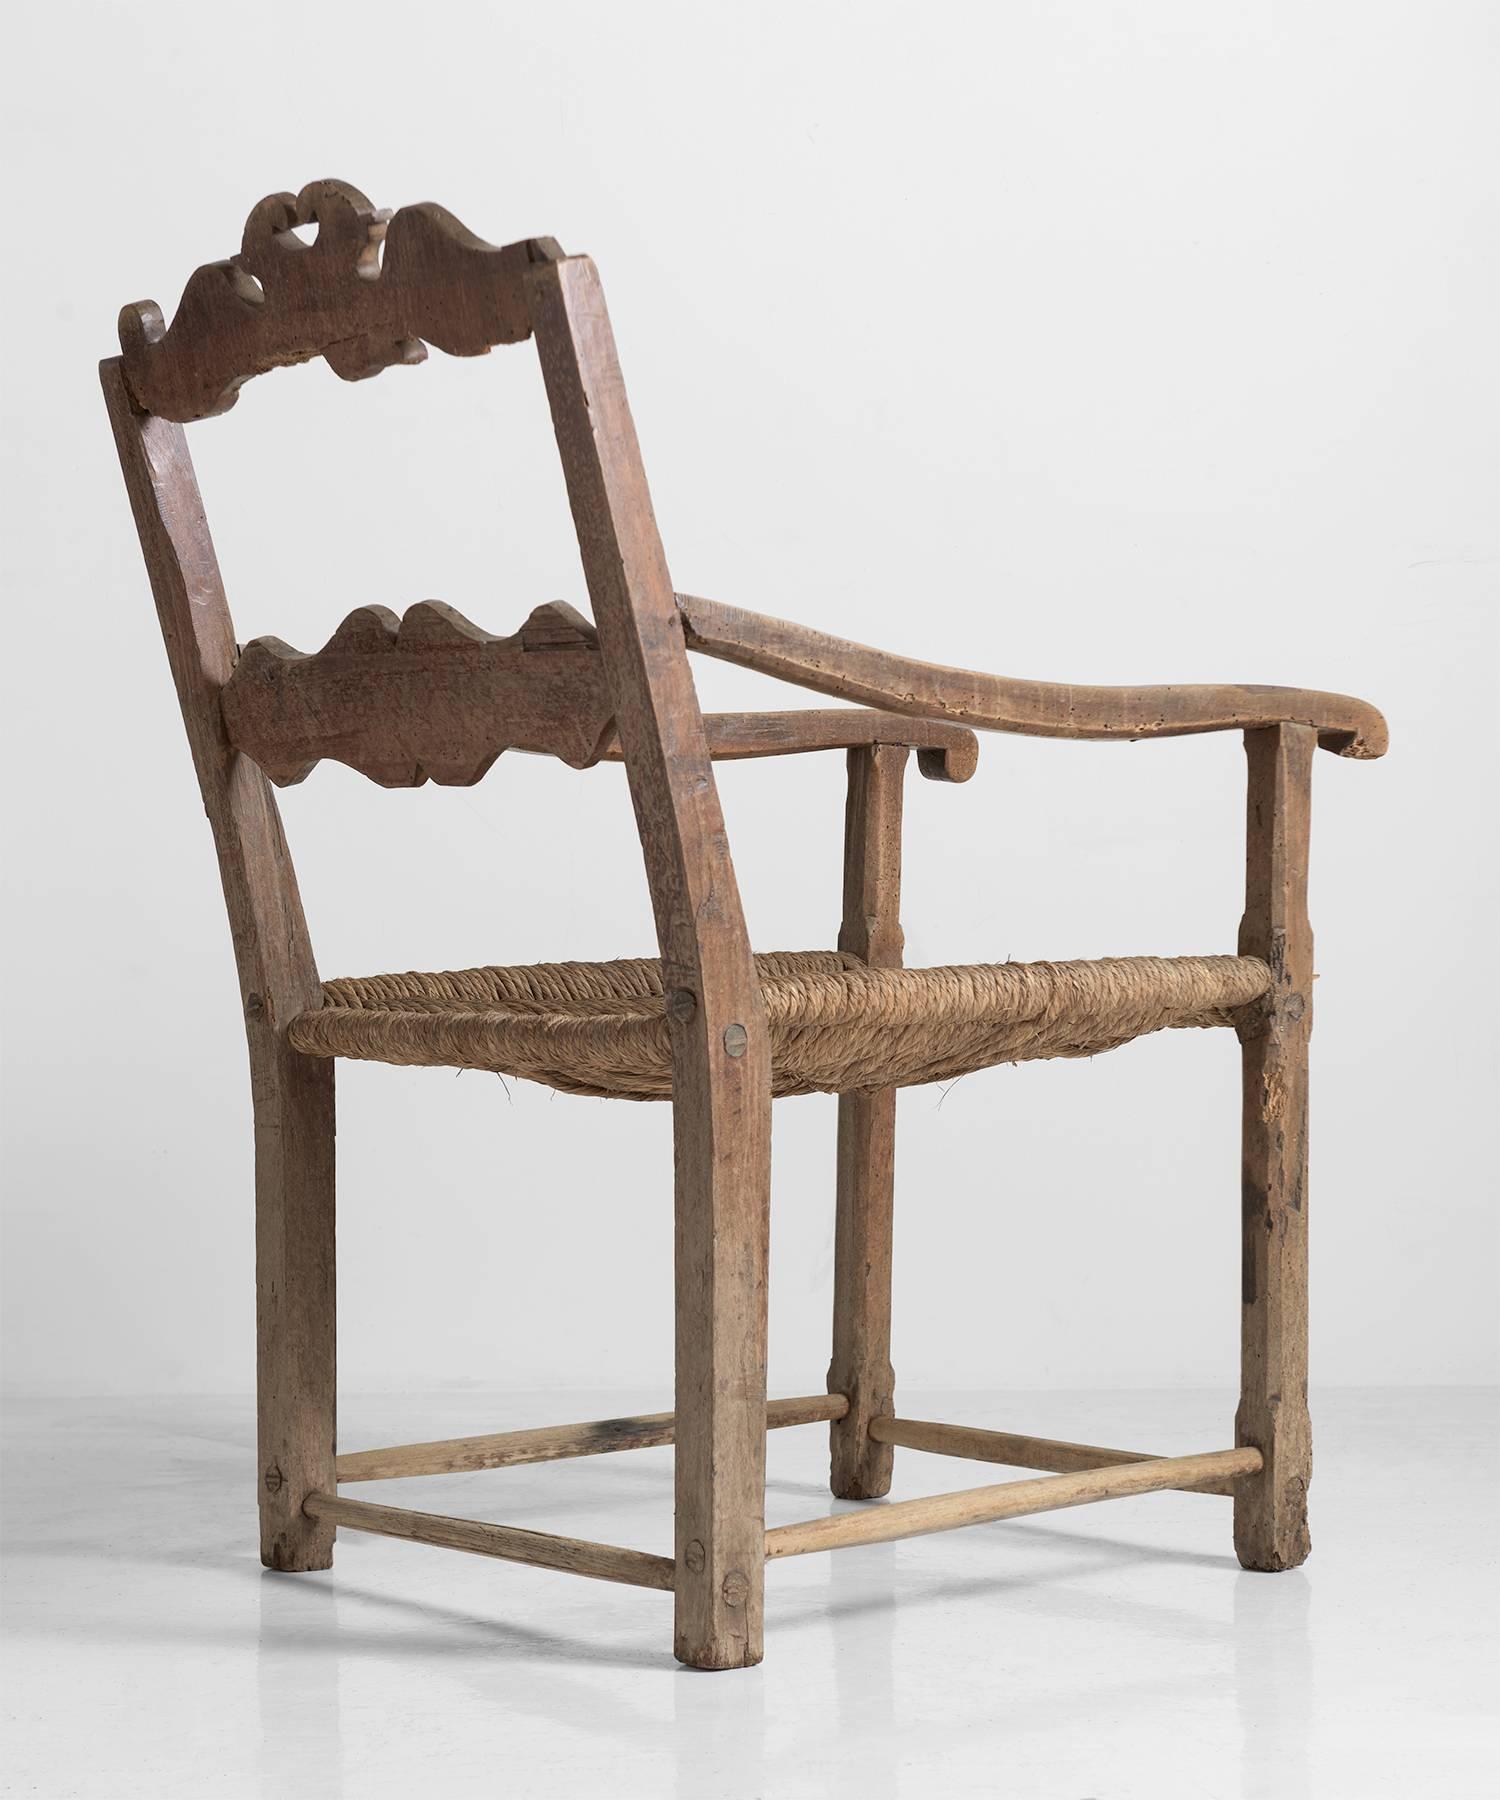 Hand-Crafted Oversized Oak and Rush Seat Farm Chair, Italy, circa 1720